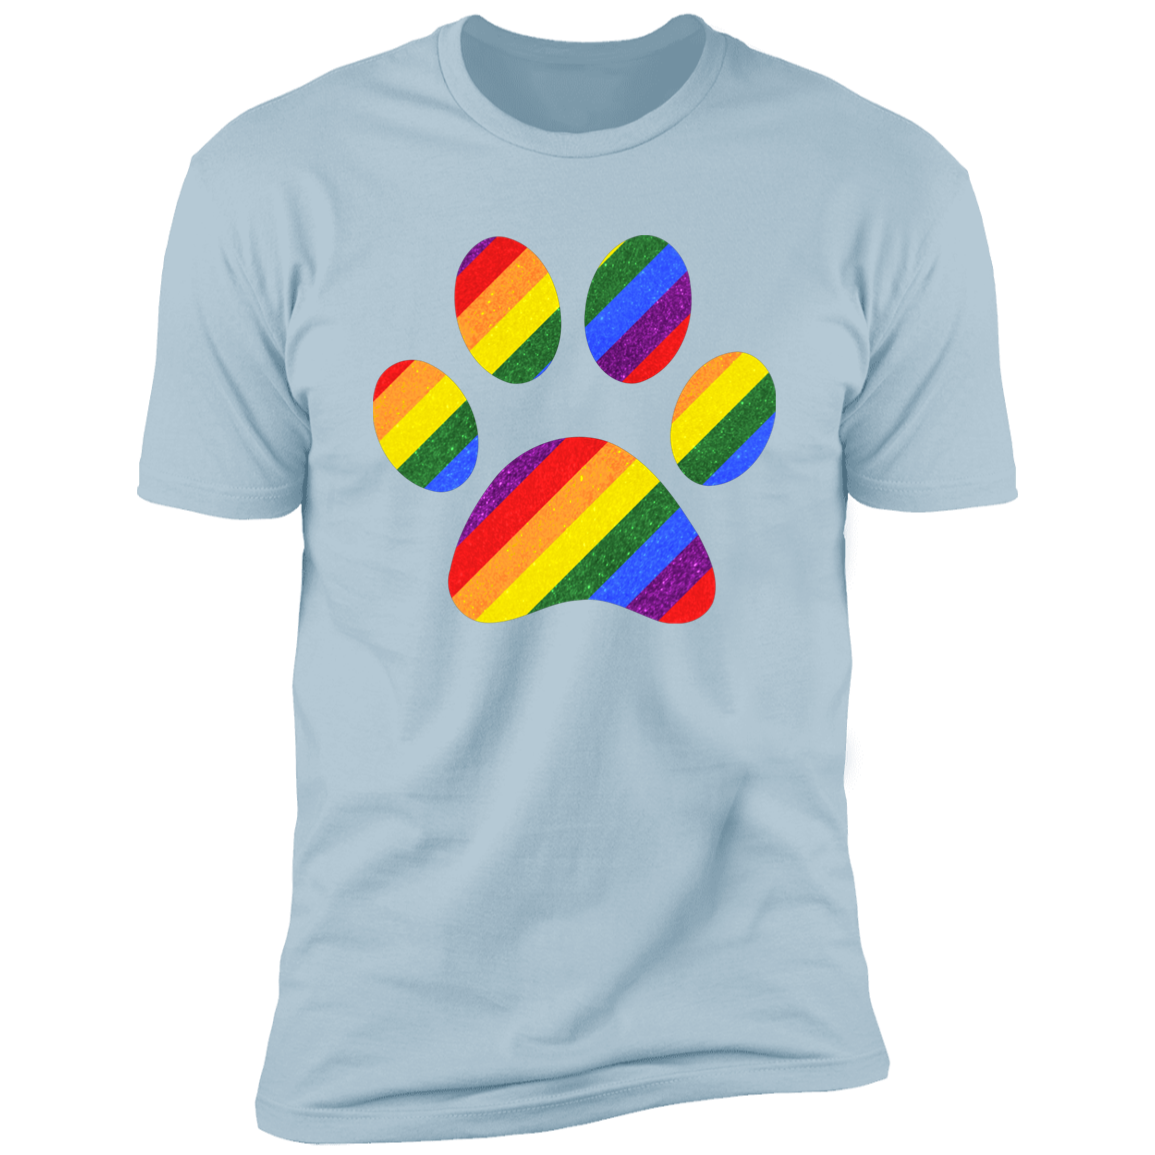 Pride Paw (Sparkles) Pride T-shirt, Paw Pride Dog Shirt for humans, in light blue